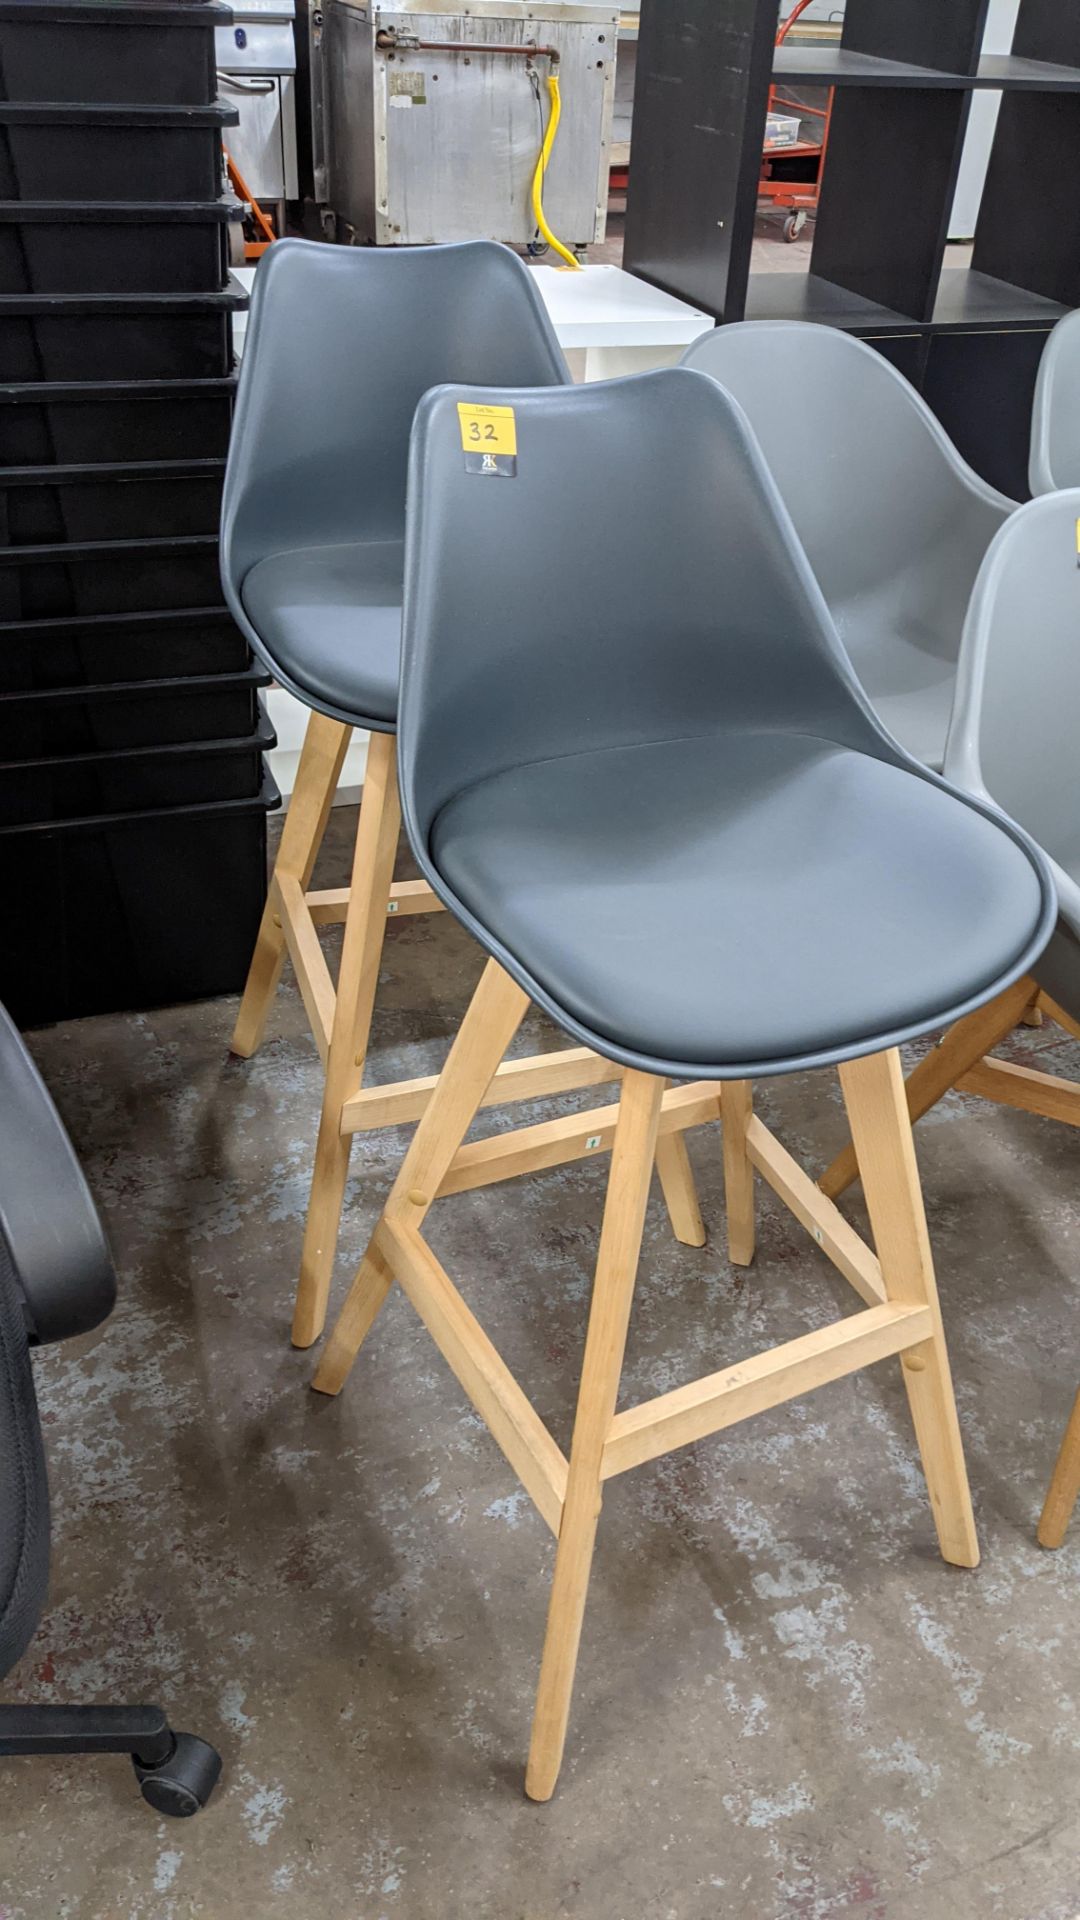 Pair of matching high backed stools each comprising wooden frame with dark grey plastic seat & padde - Image 2 of 5